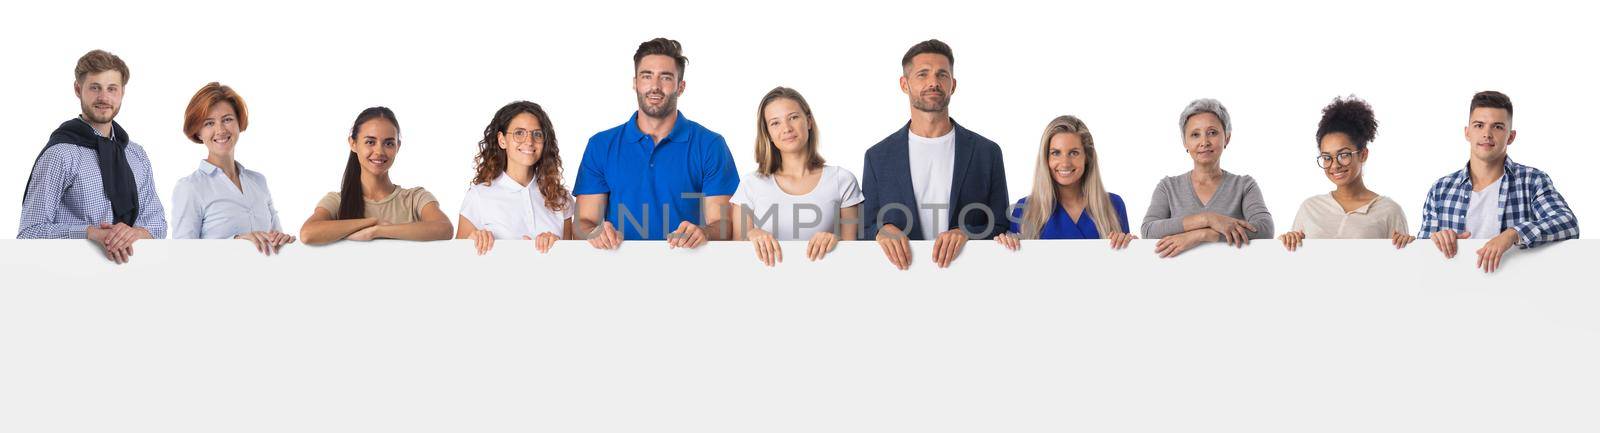 Diverse people holding blank sign by ALotOfPeople